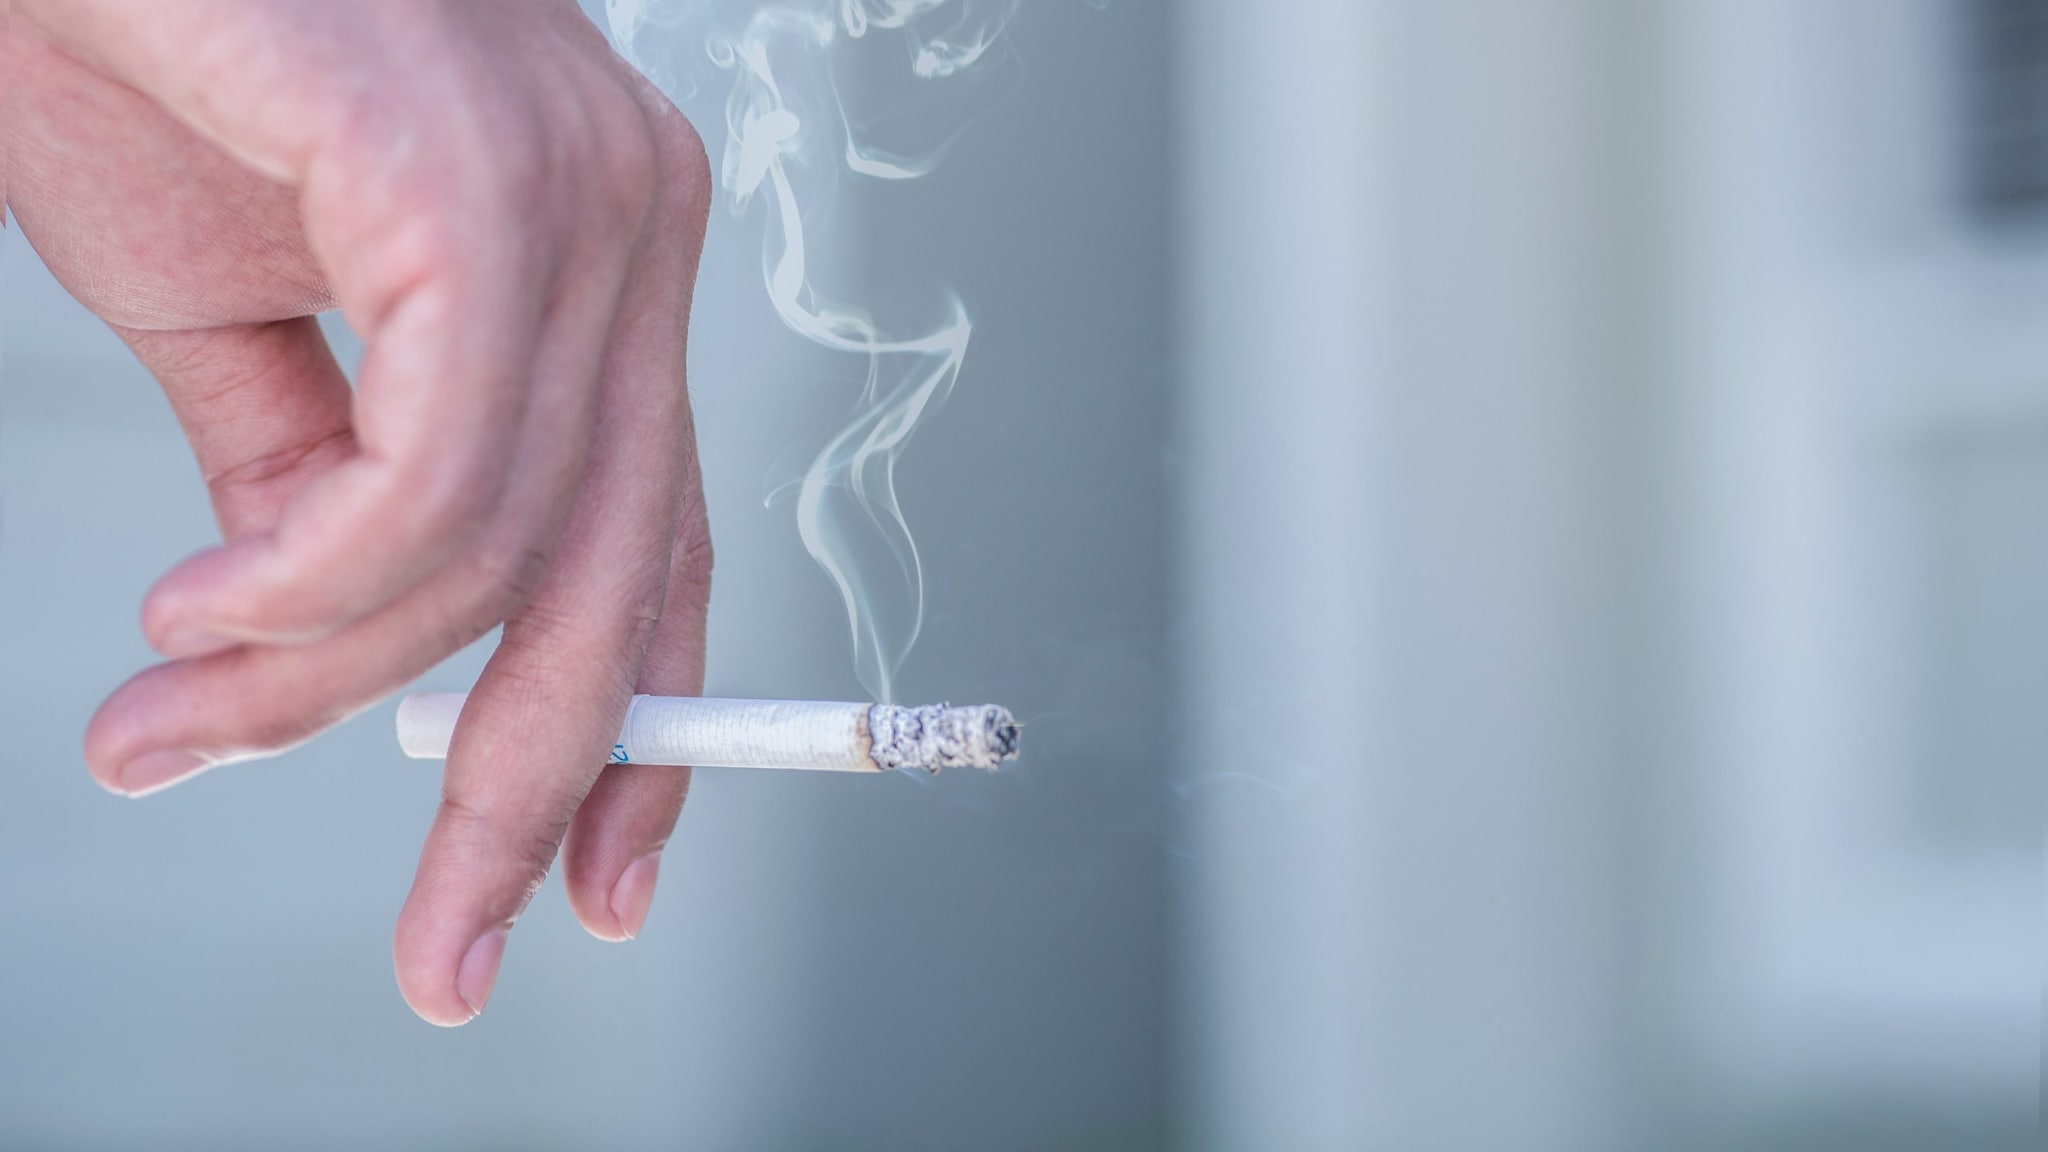 A hand holding a lit cigarette with cigarette smoke flowing upward.